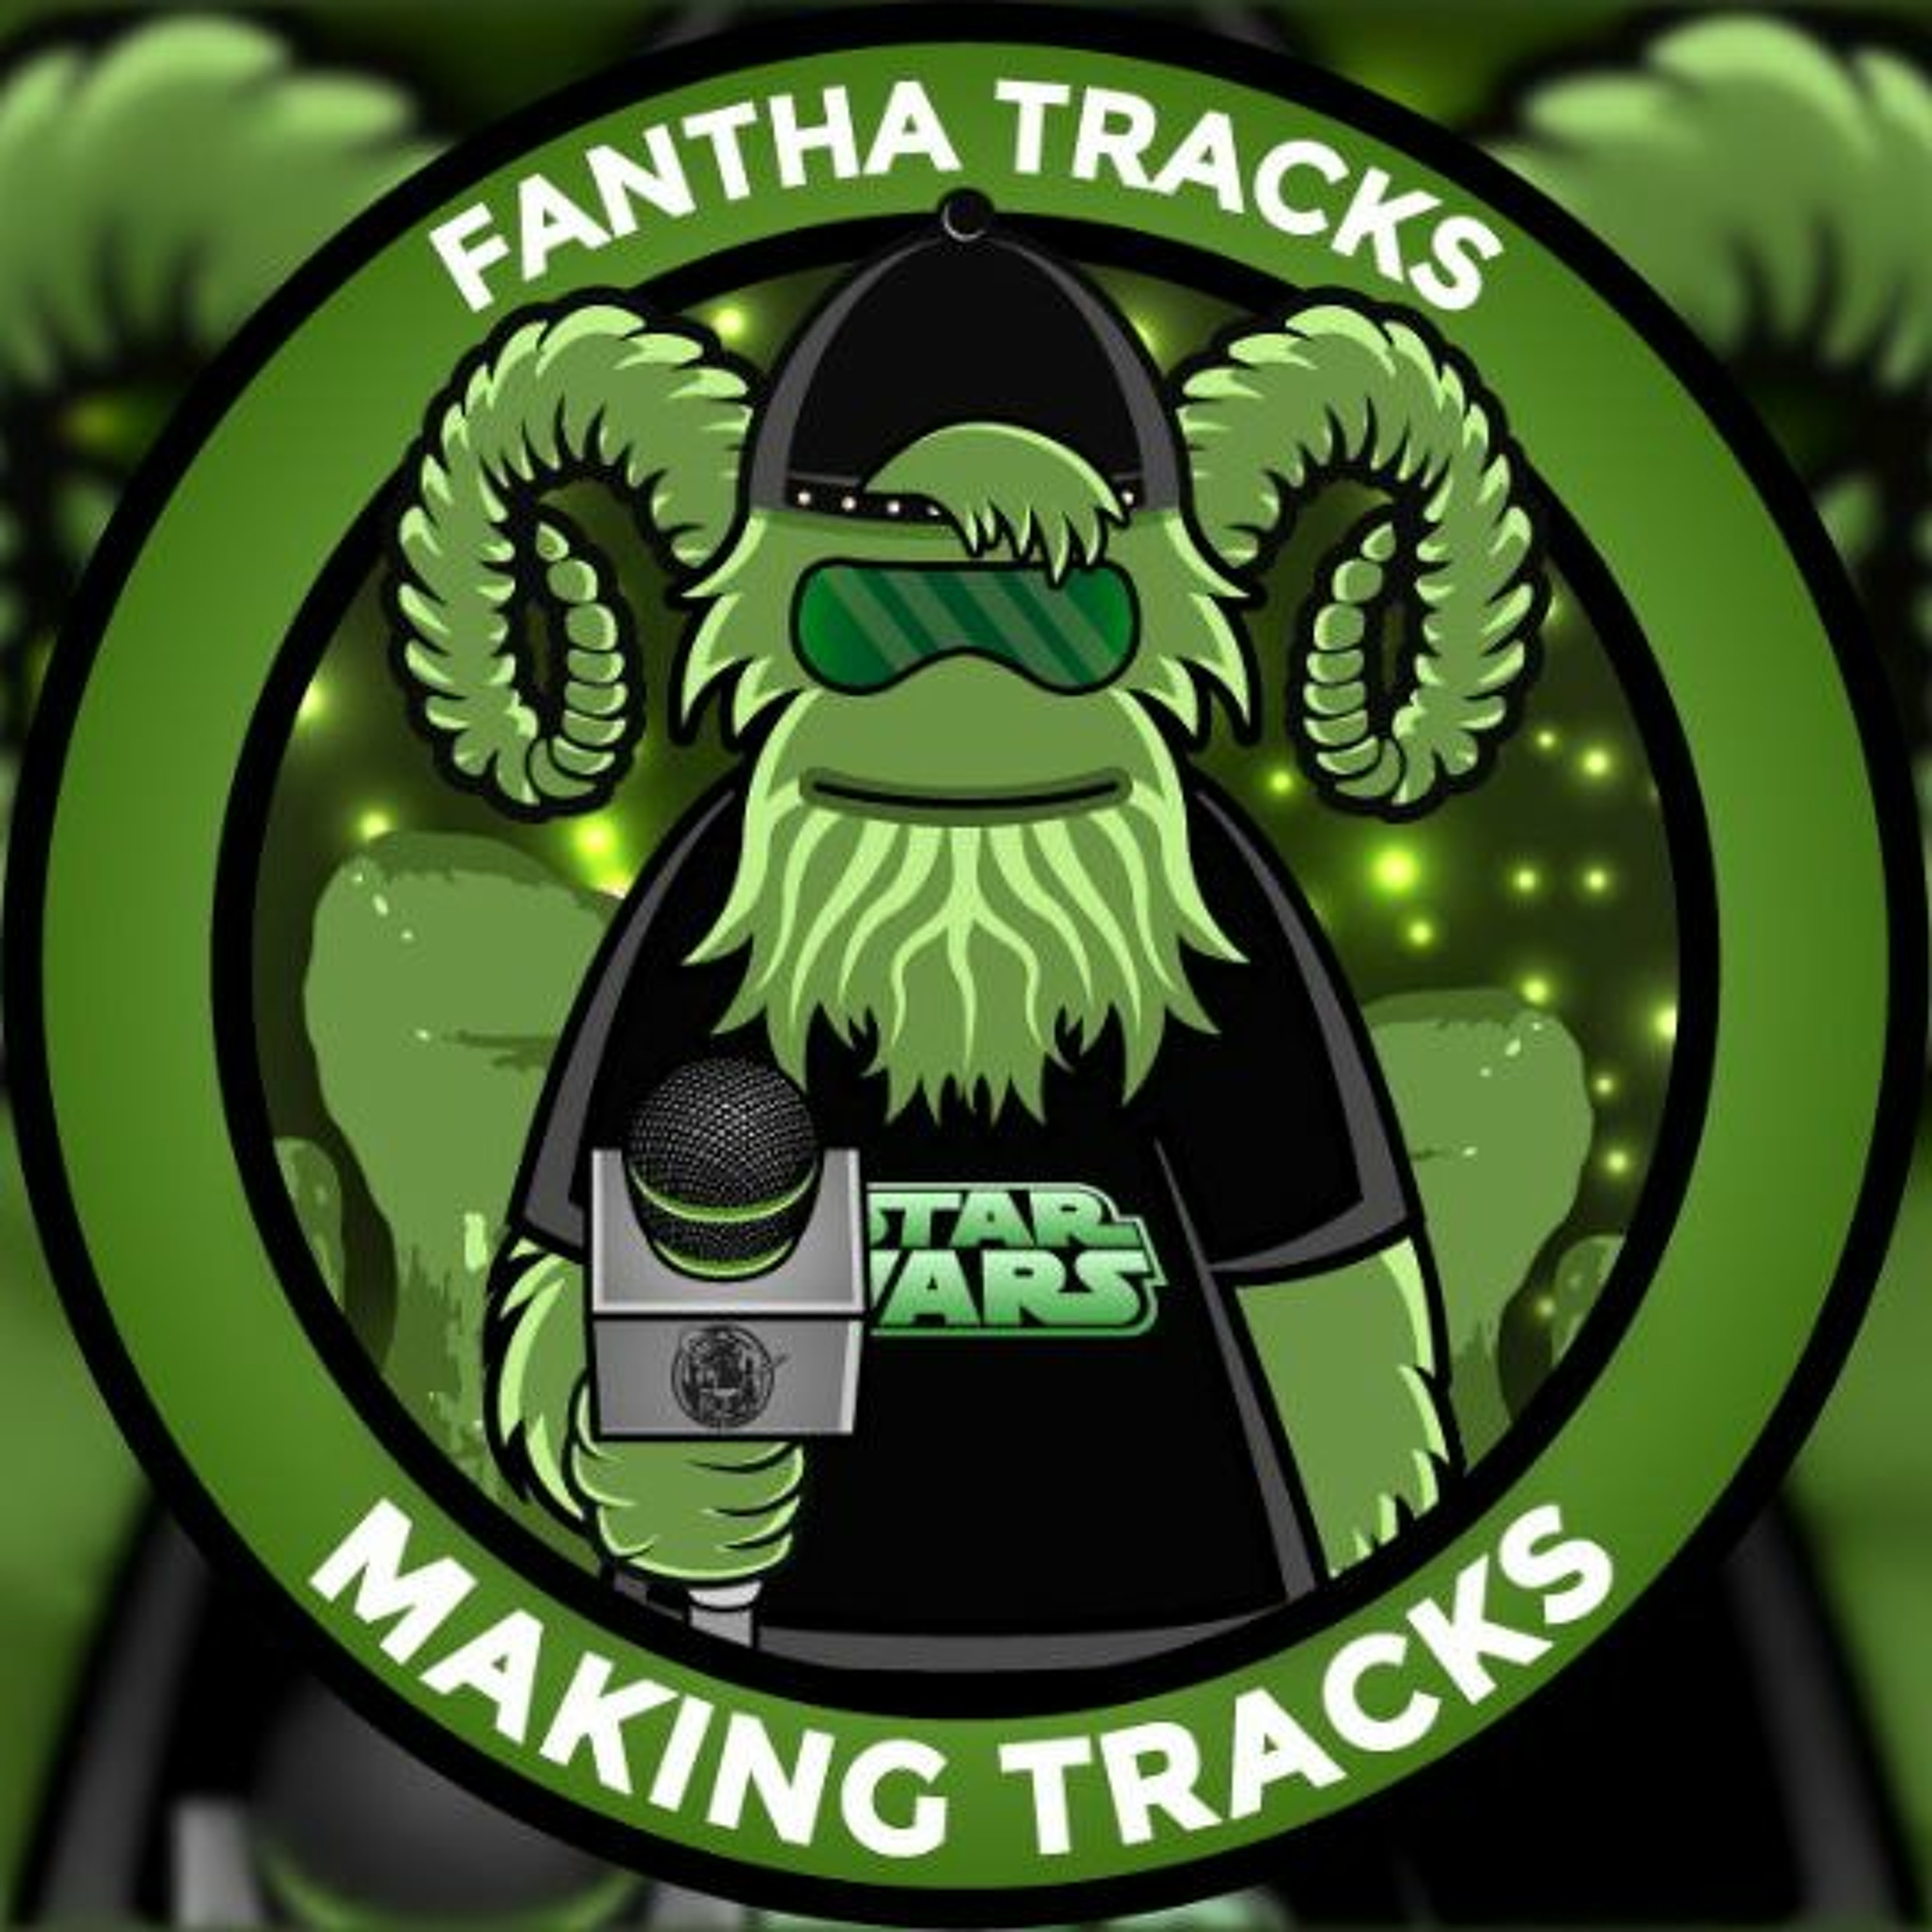 Making Tracks Episode 147: Banana Skin Soul: With guest Dorian Kingy